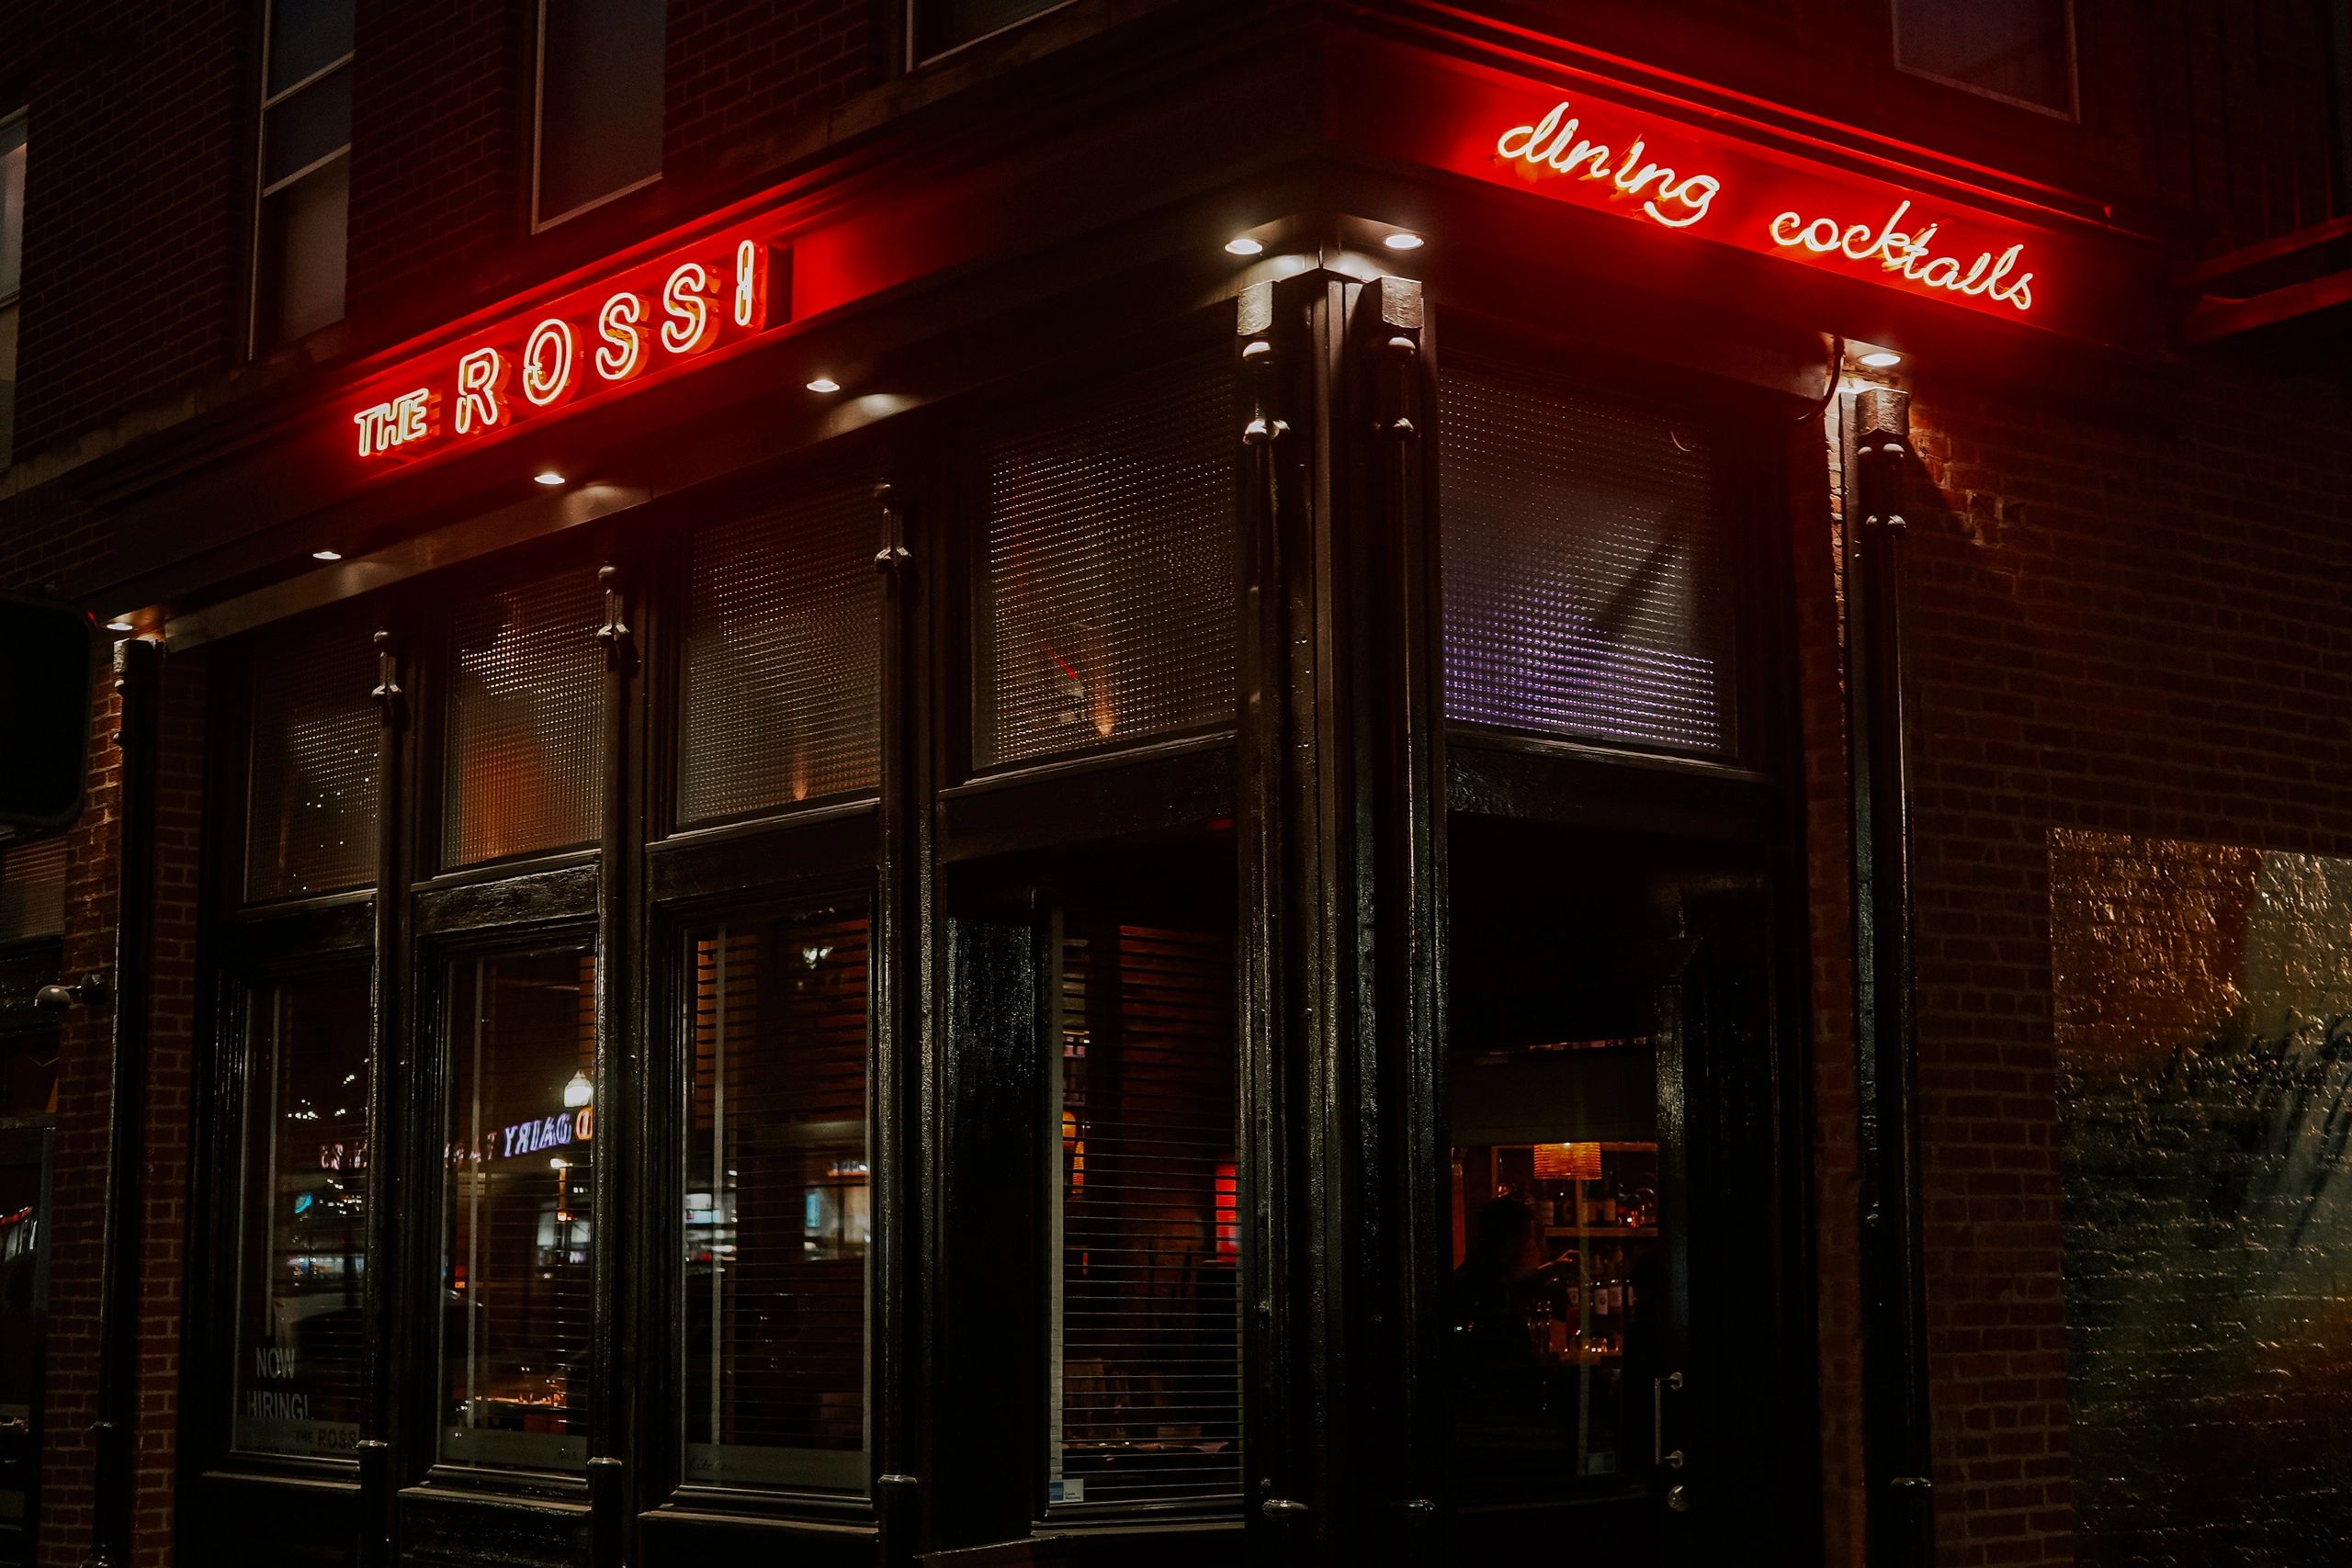 the rossi kitchen and bar menu